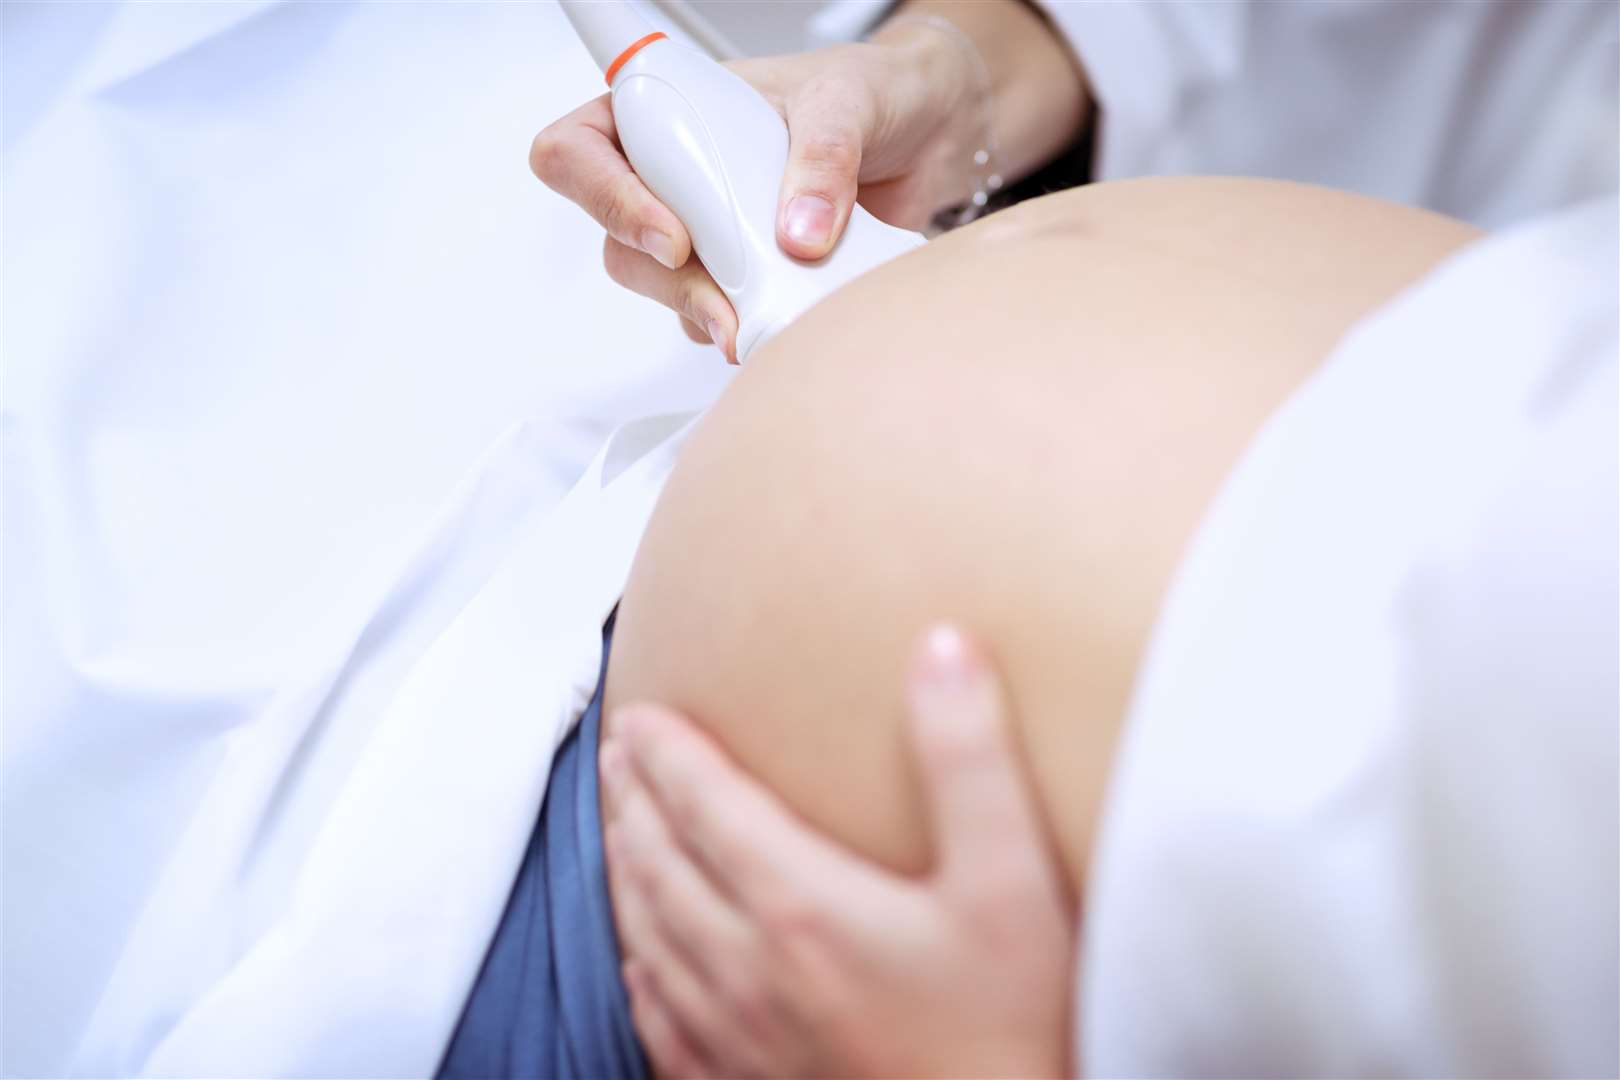 Pregnant women who catch the virus are expected to be offered an additional scan once they have recovered